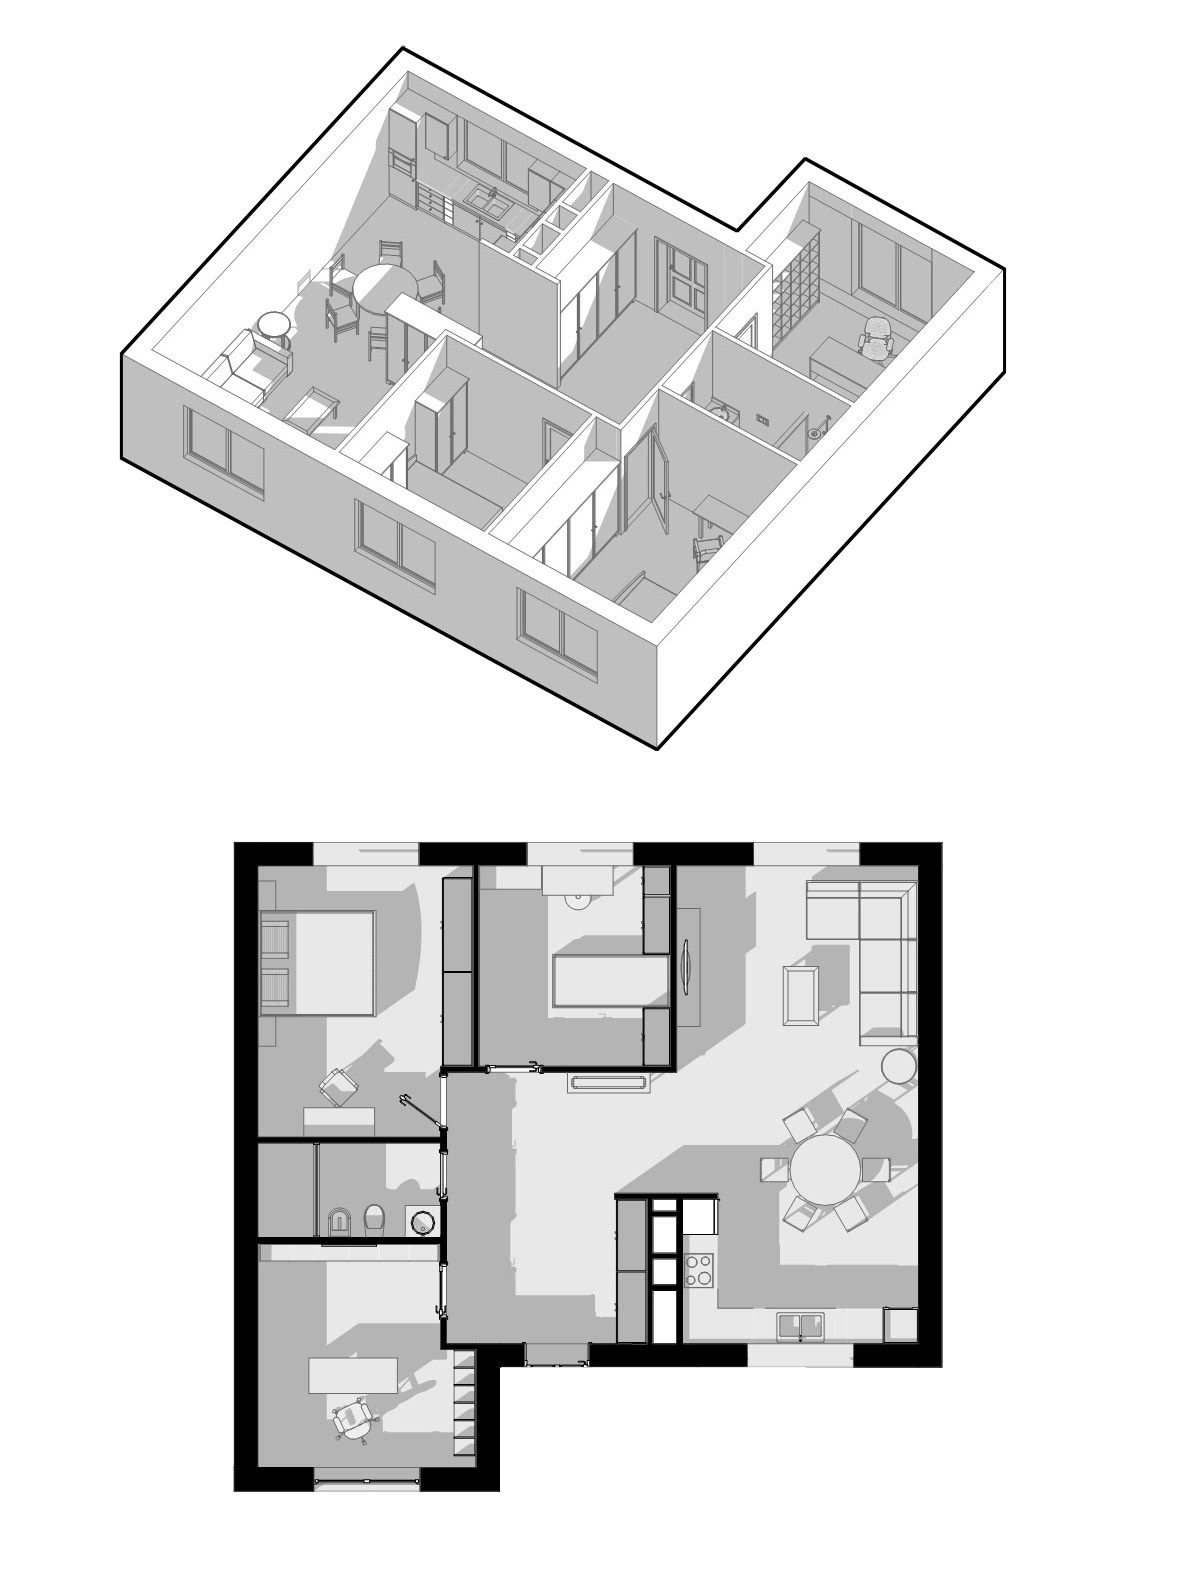 The 3D layout of a luxury apartment